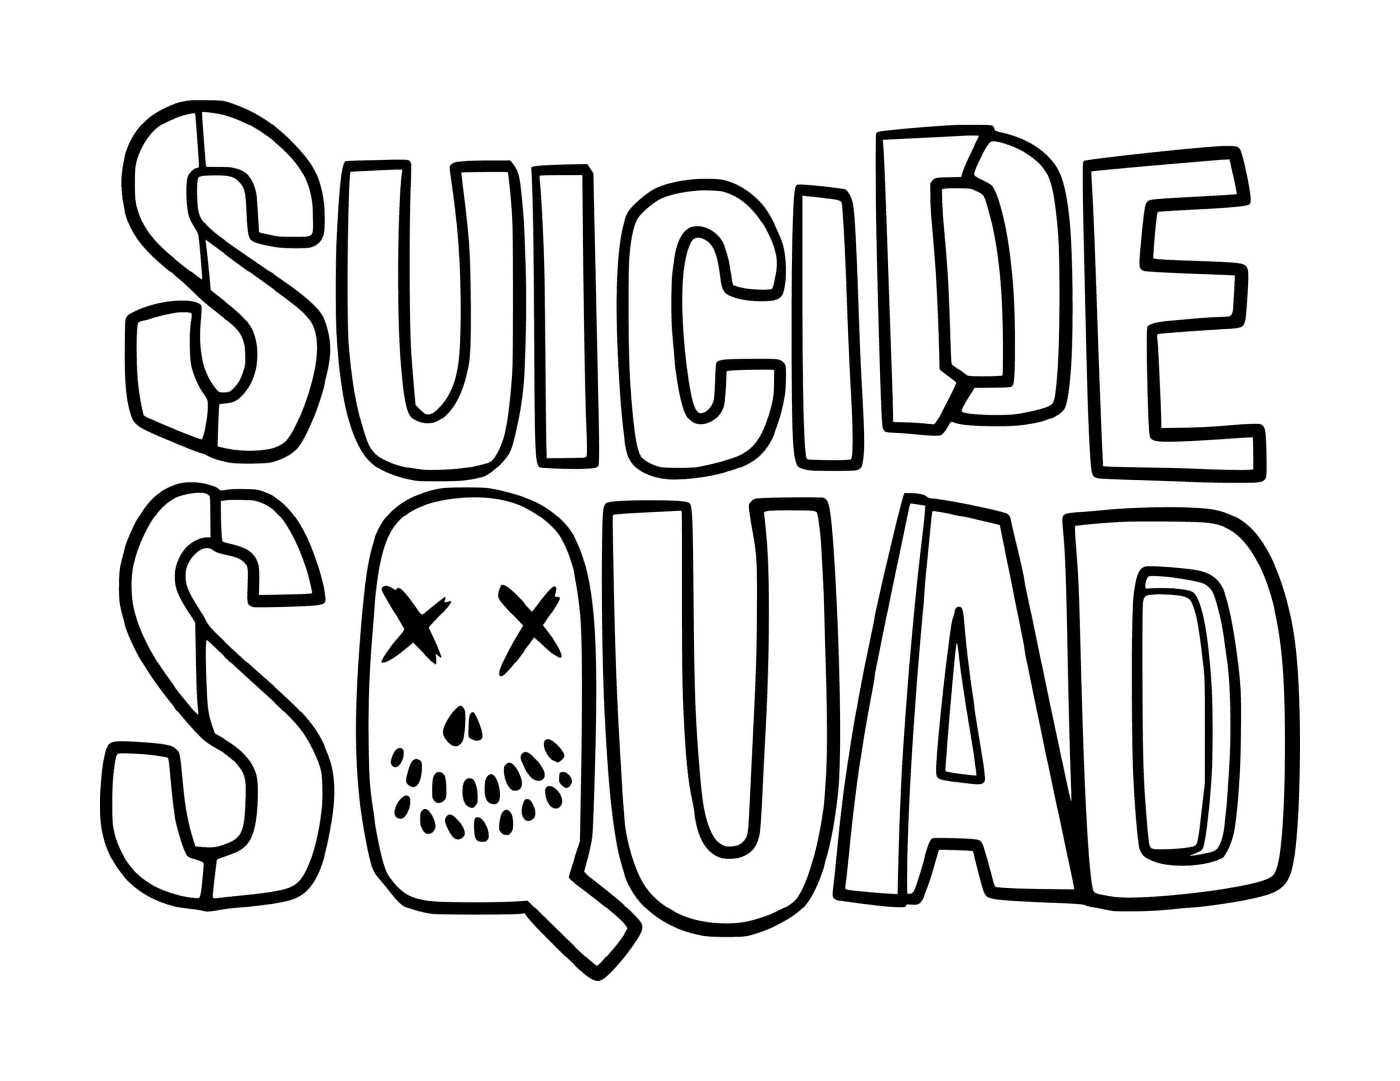  The words Squad suicide 